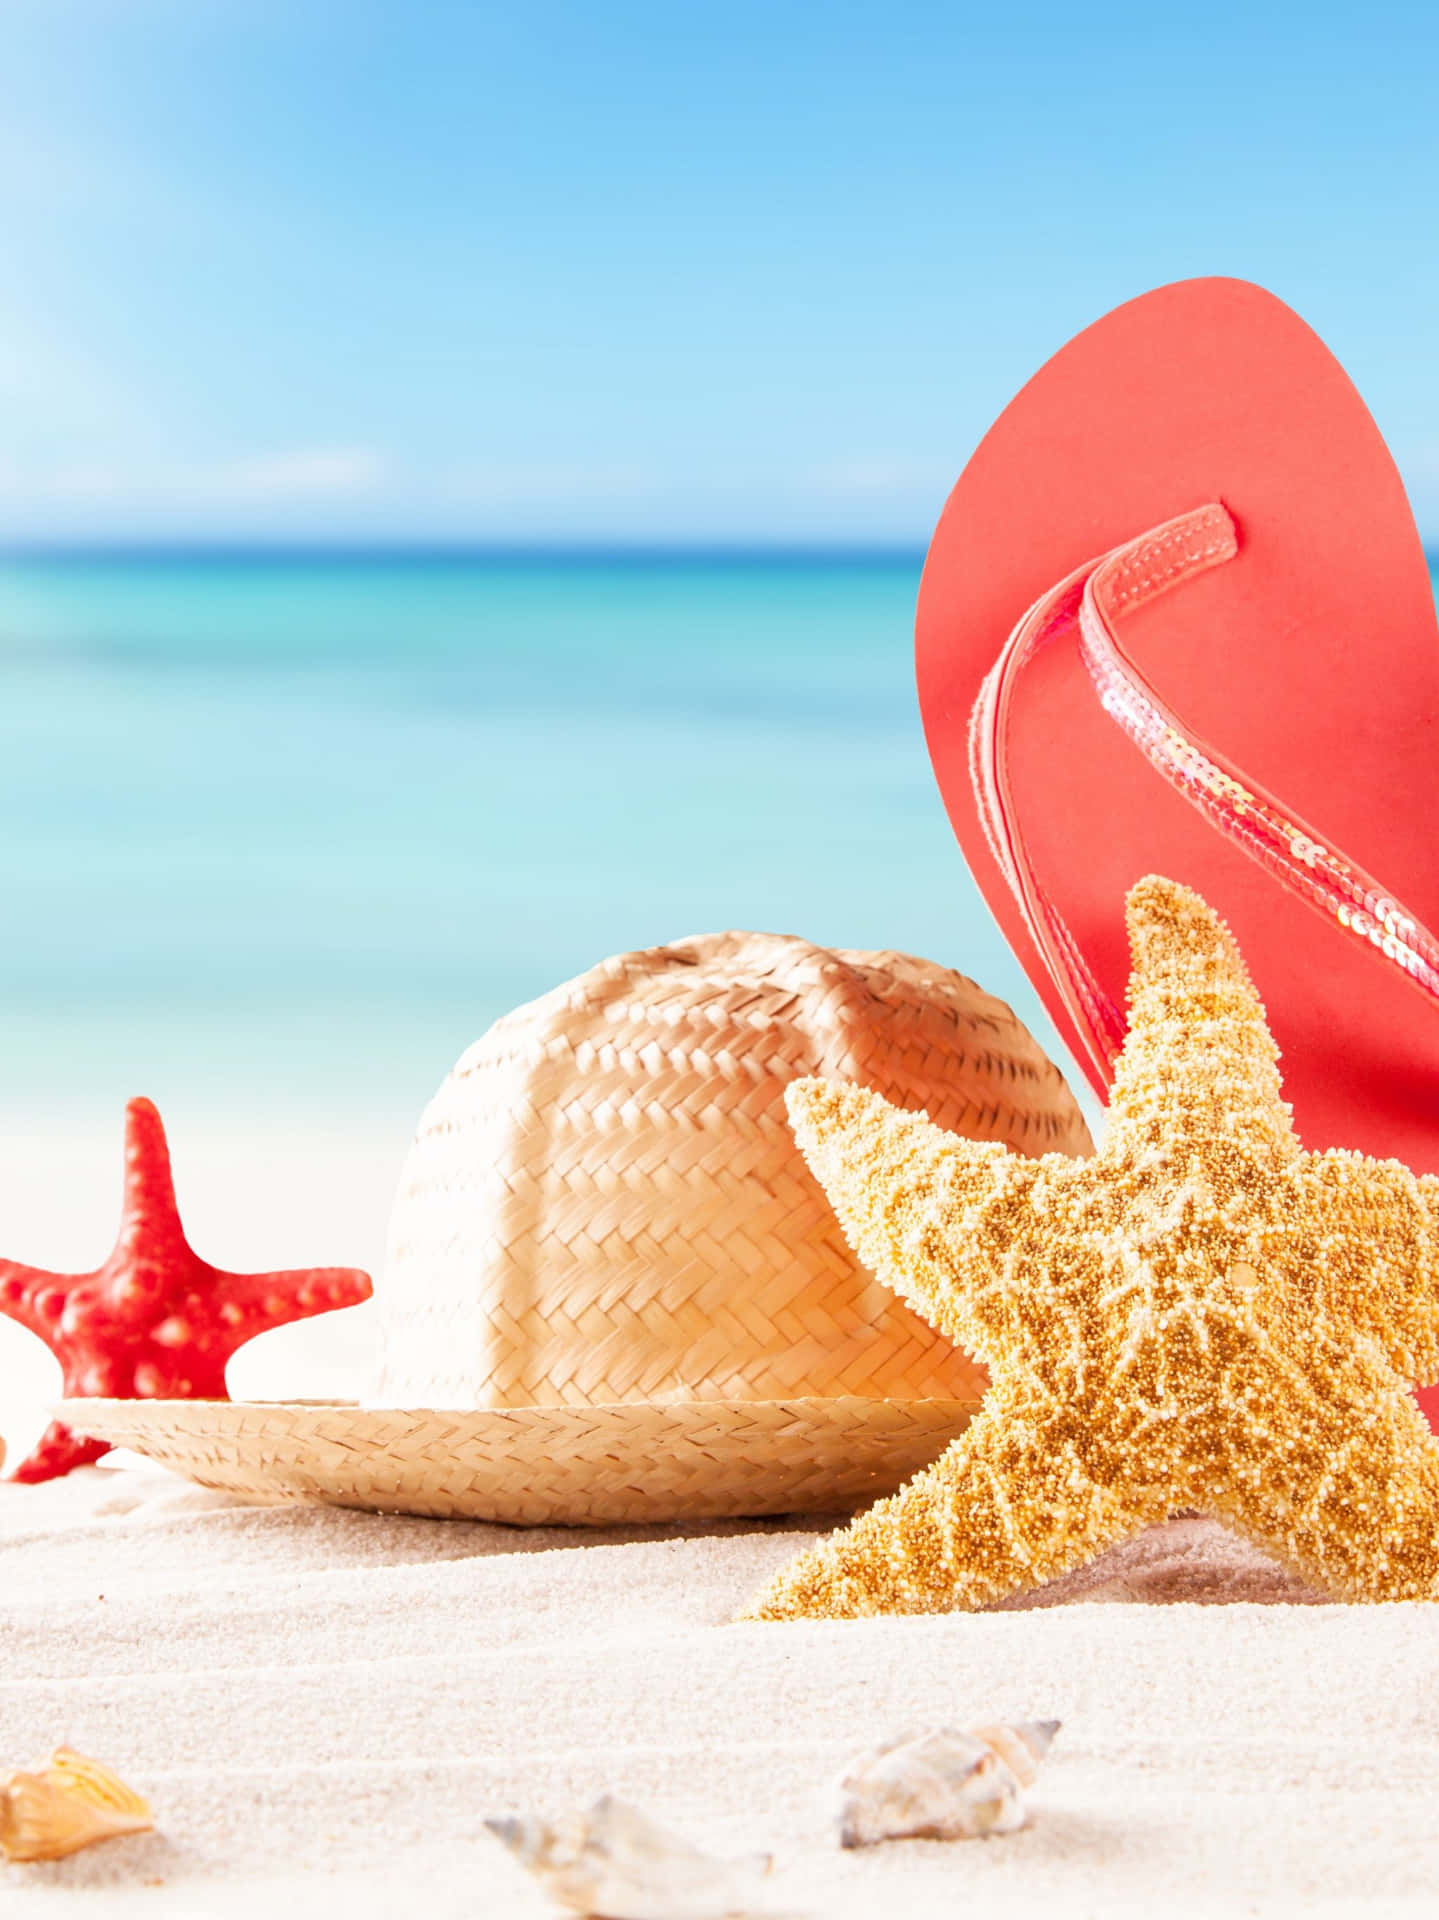 A Pair Of Flip Flops And A Starfish On The Beach Wallpaper